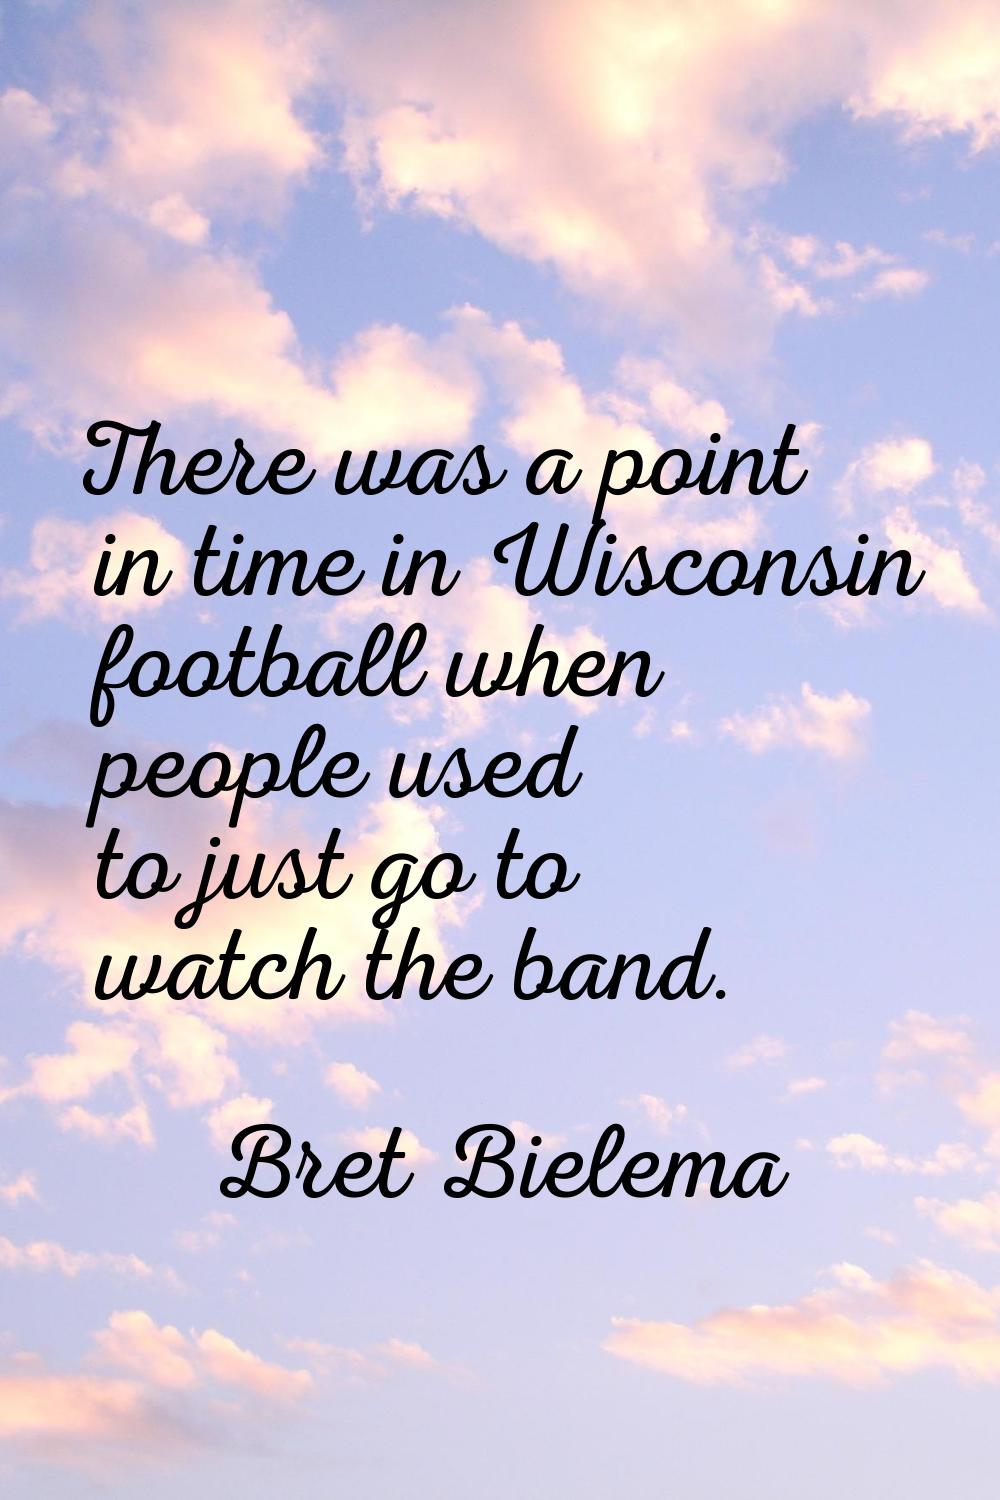 There was a point in time in Wisconsin football when people used to just go to watch the band.